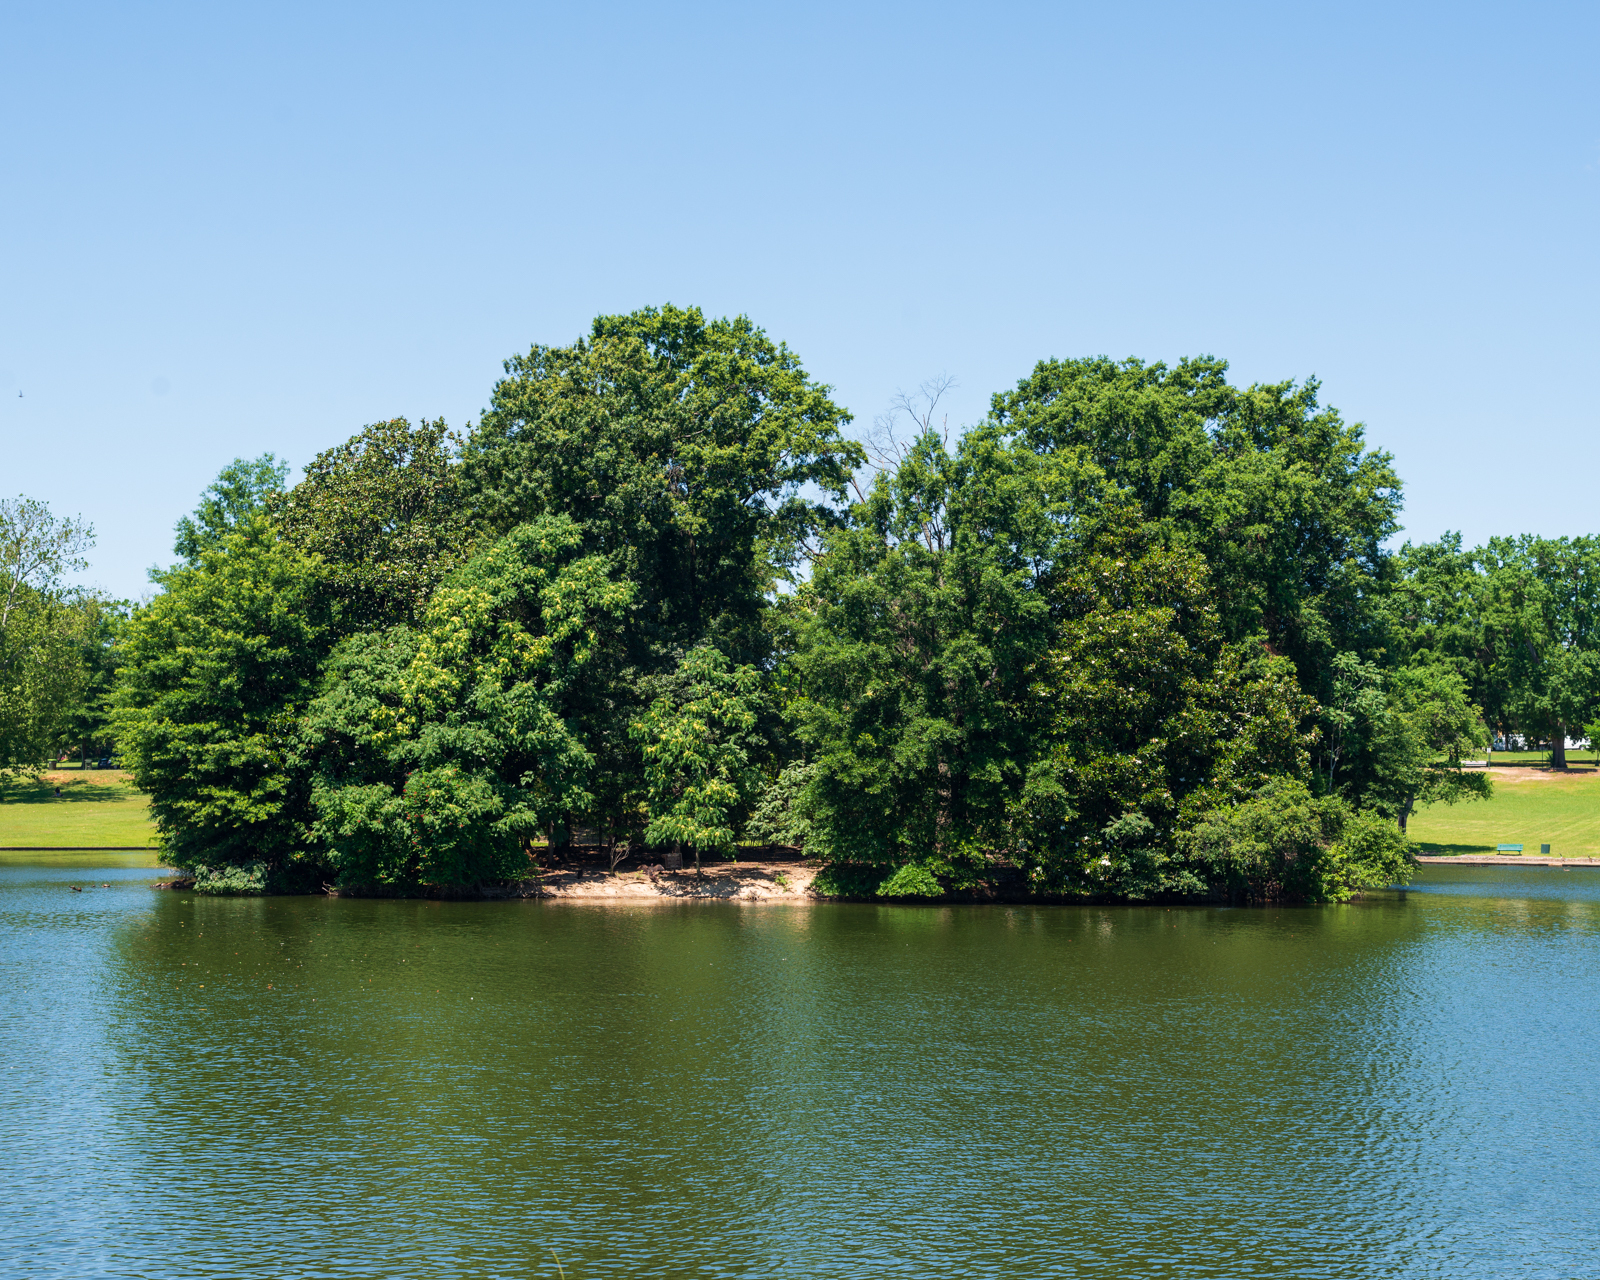 trees on a small island in the middle of the pond in Byrd Park